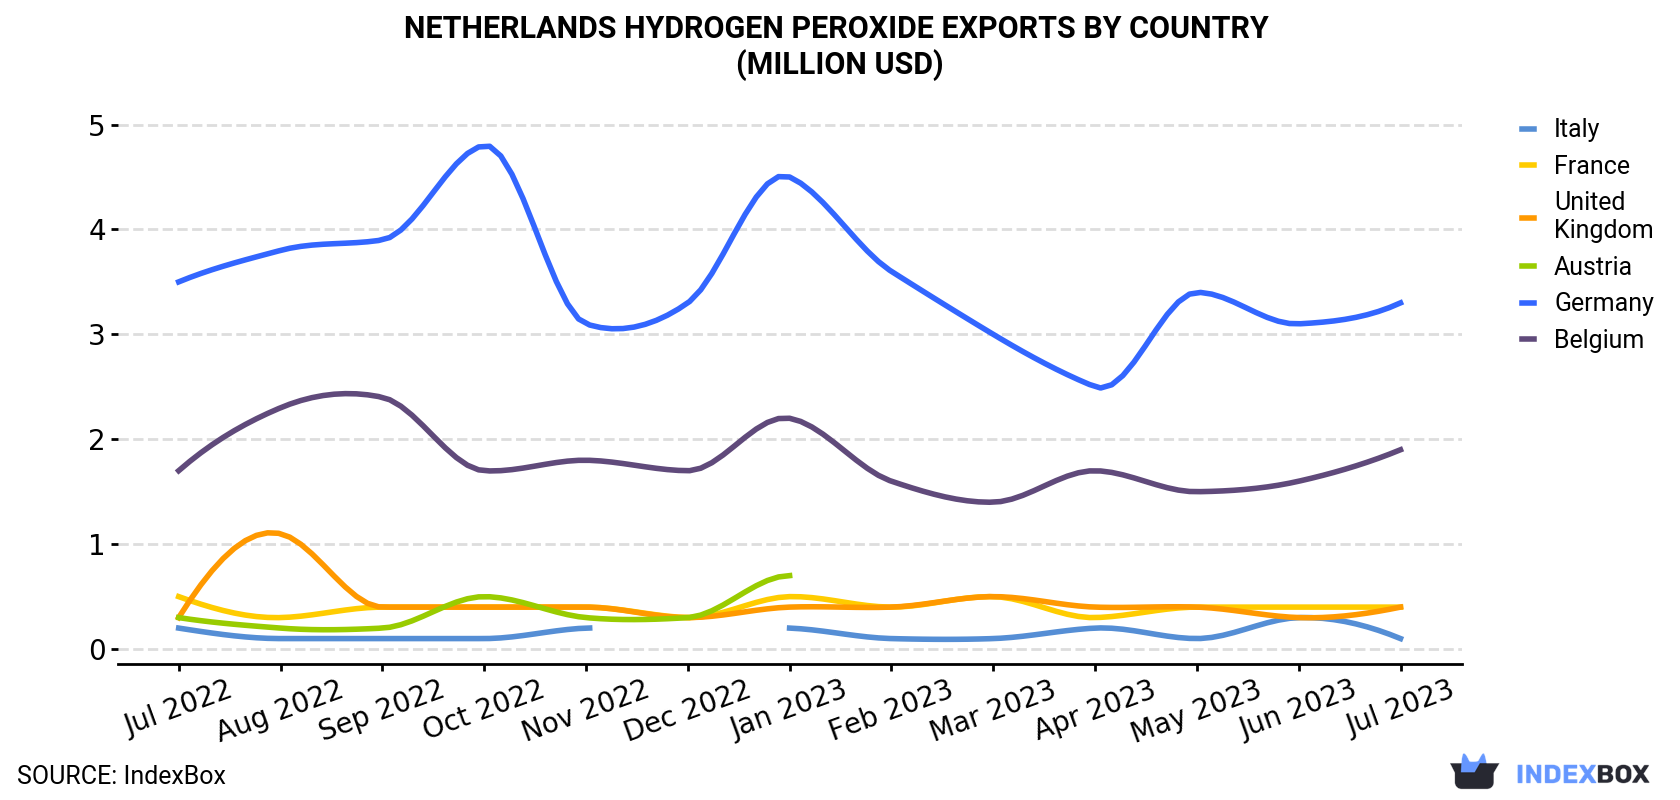 Netherlands Hydrogen Peroxide Exports By Country (Million USD)